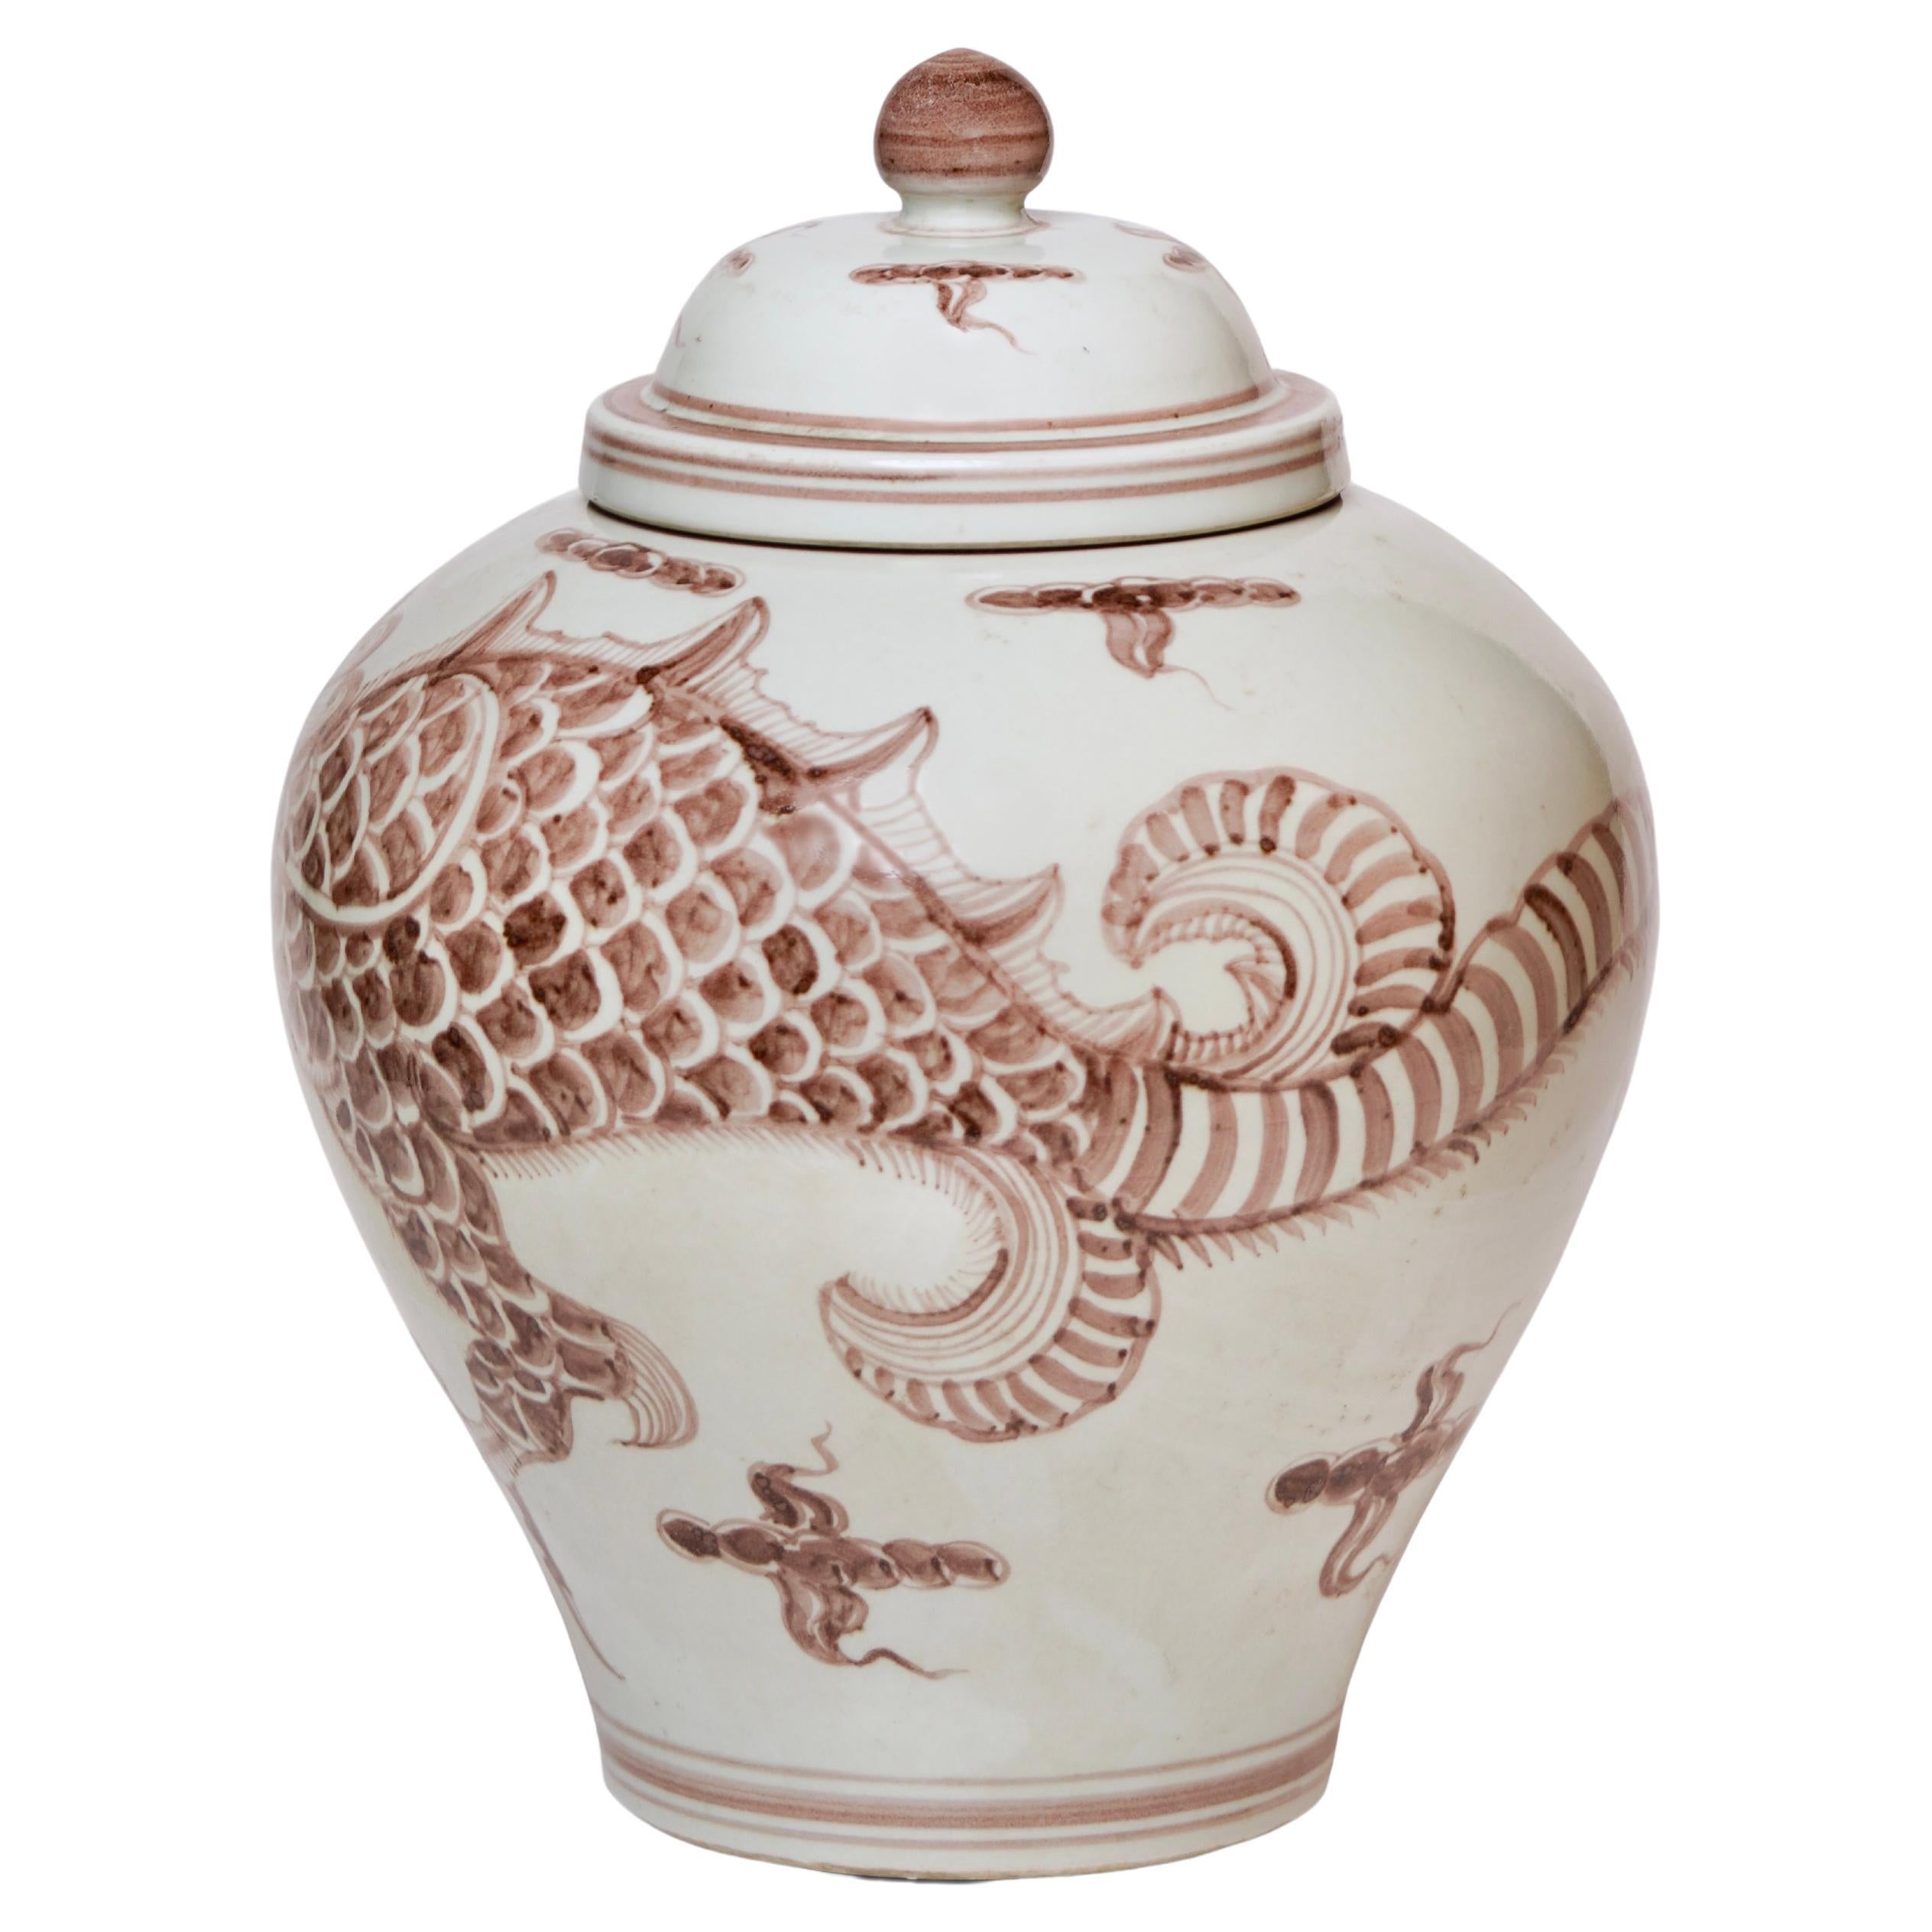 This temple jar is a traditional porcelain vessel from Jingdezhen, a town long distinguished by imperial patronage. The rustic finish porcelain body has been painted with a lively Yuan Dynasty style 